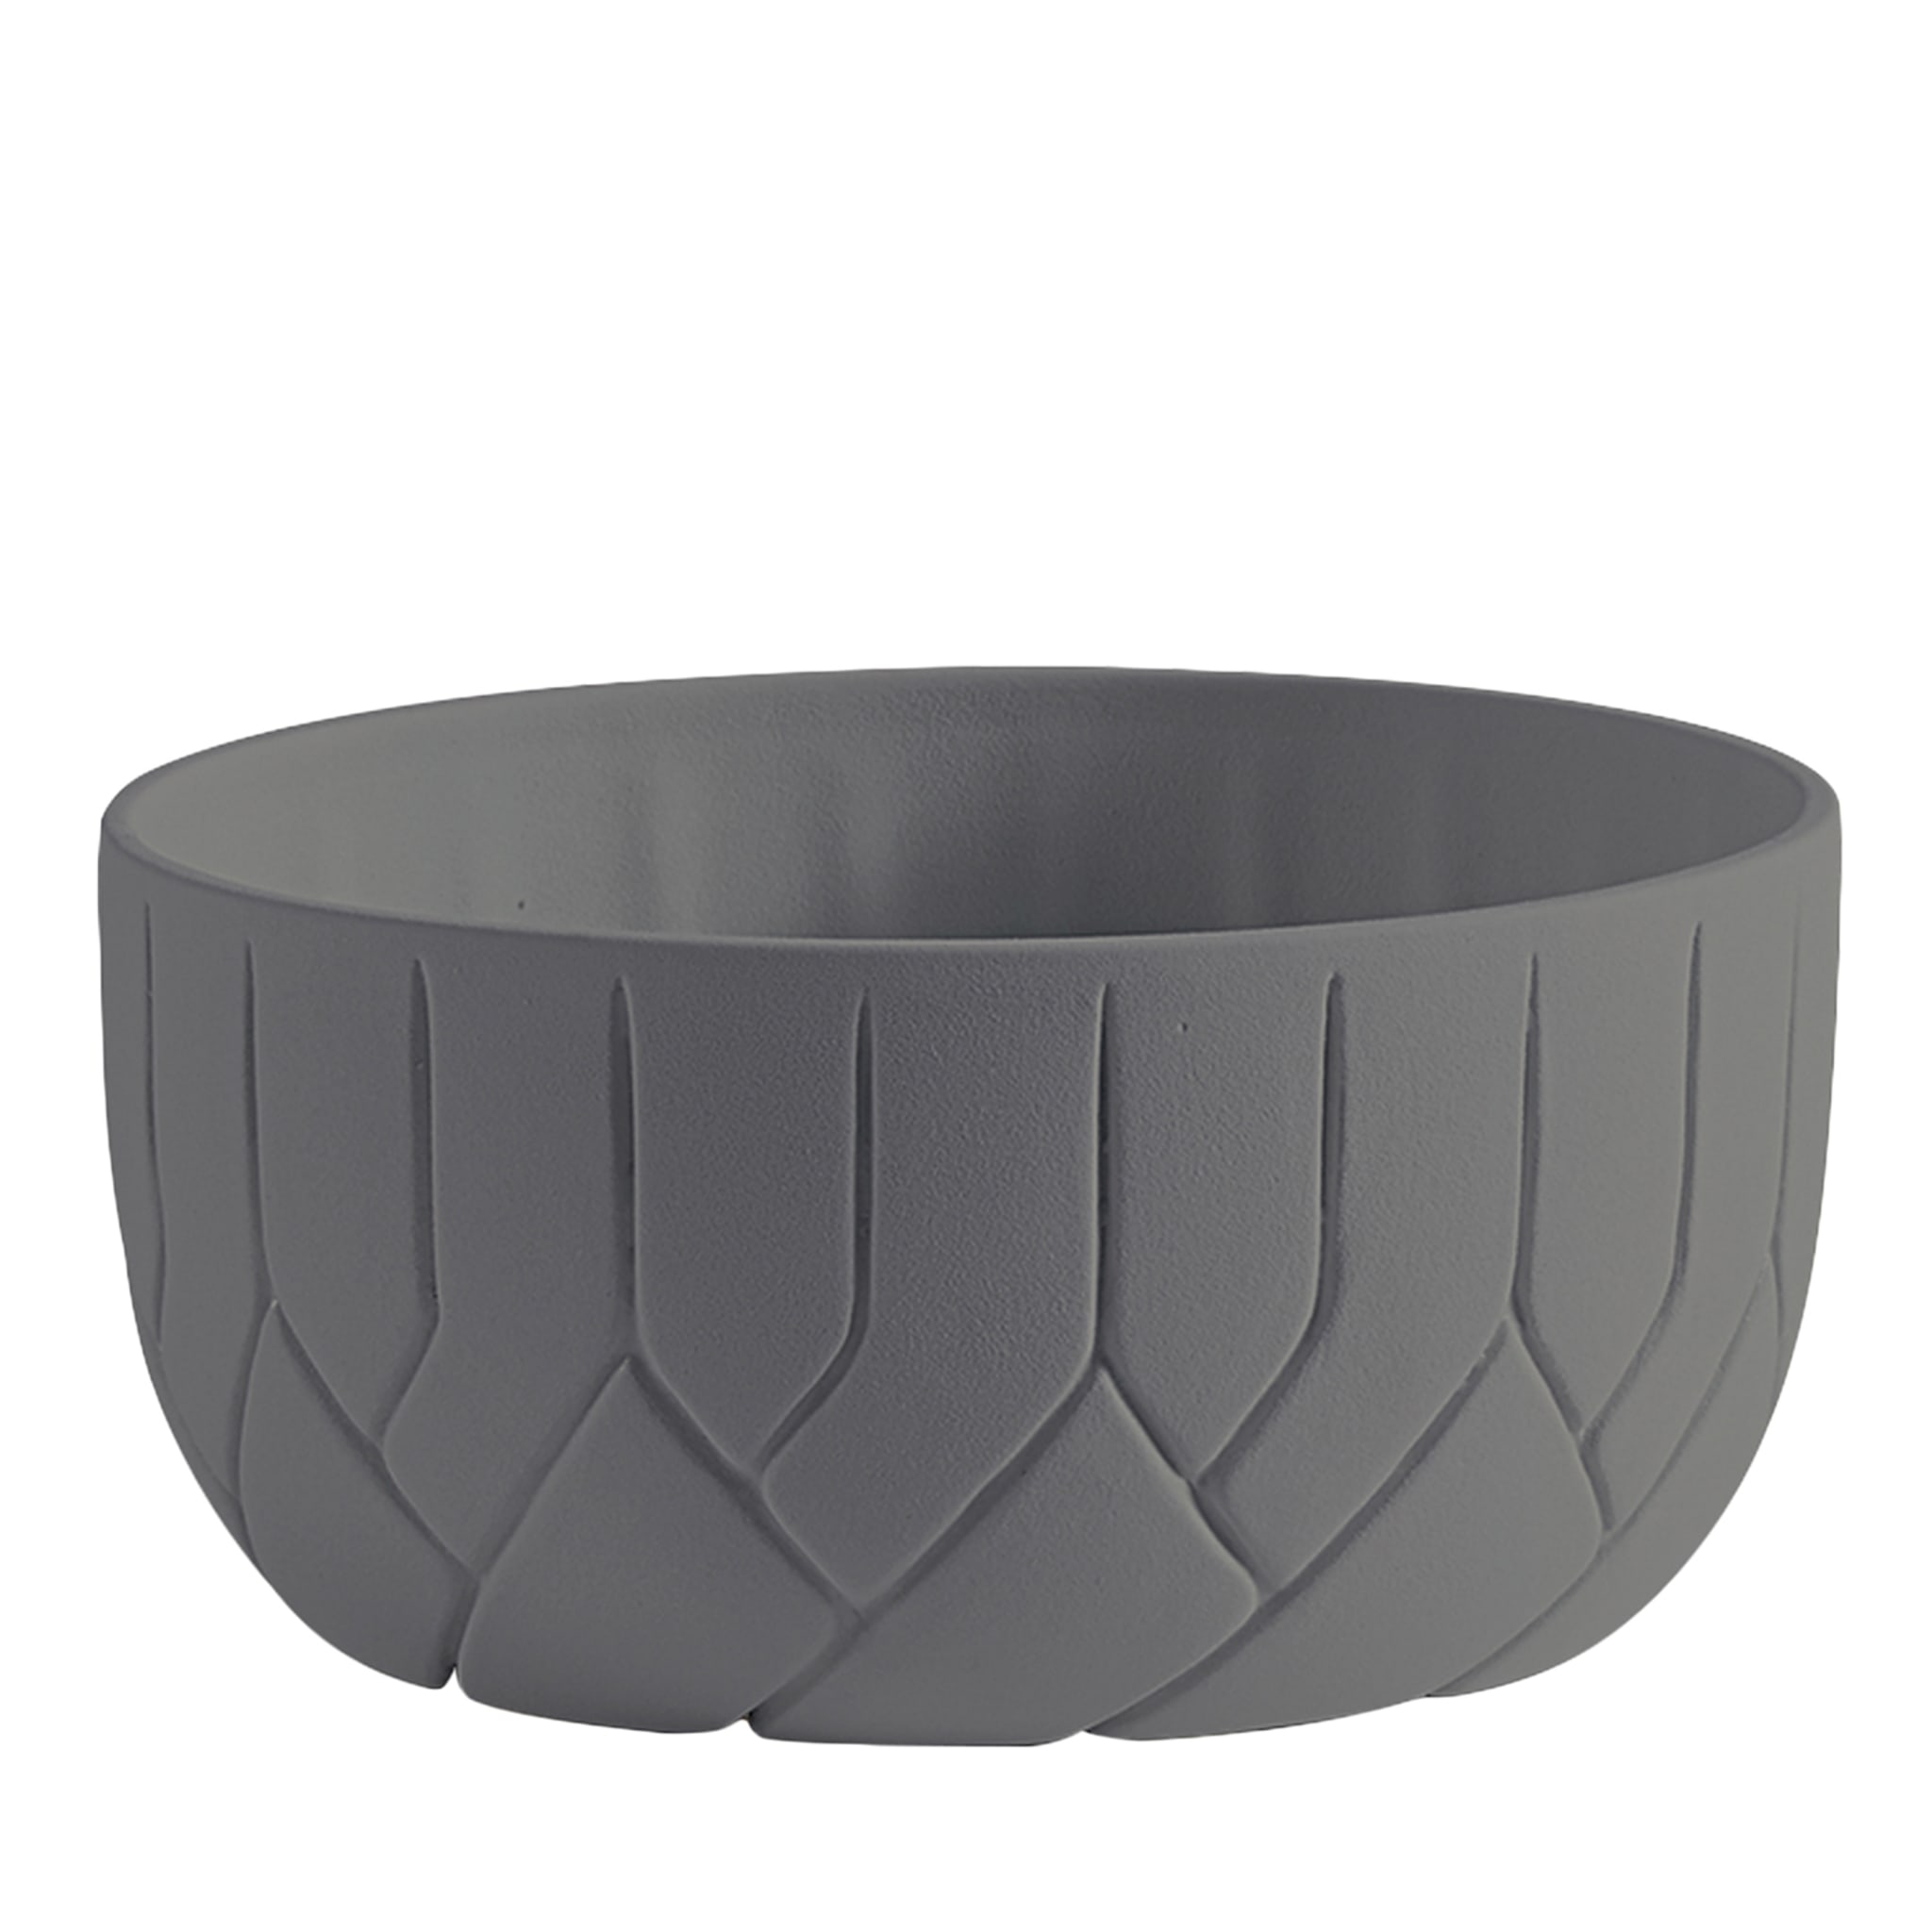 Frattali Large Anthracite Decorative Bowl by Faberhama - Main view